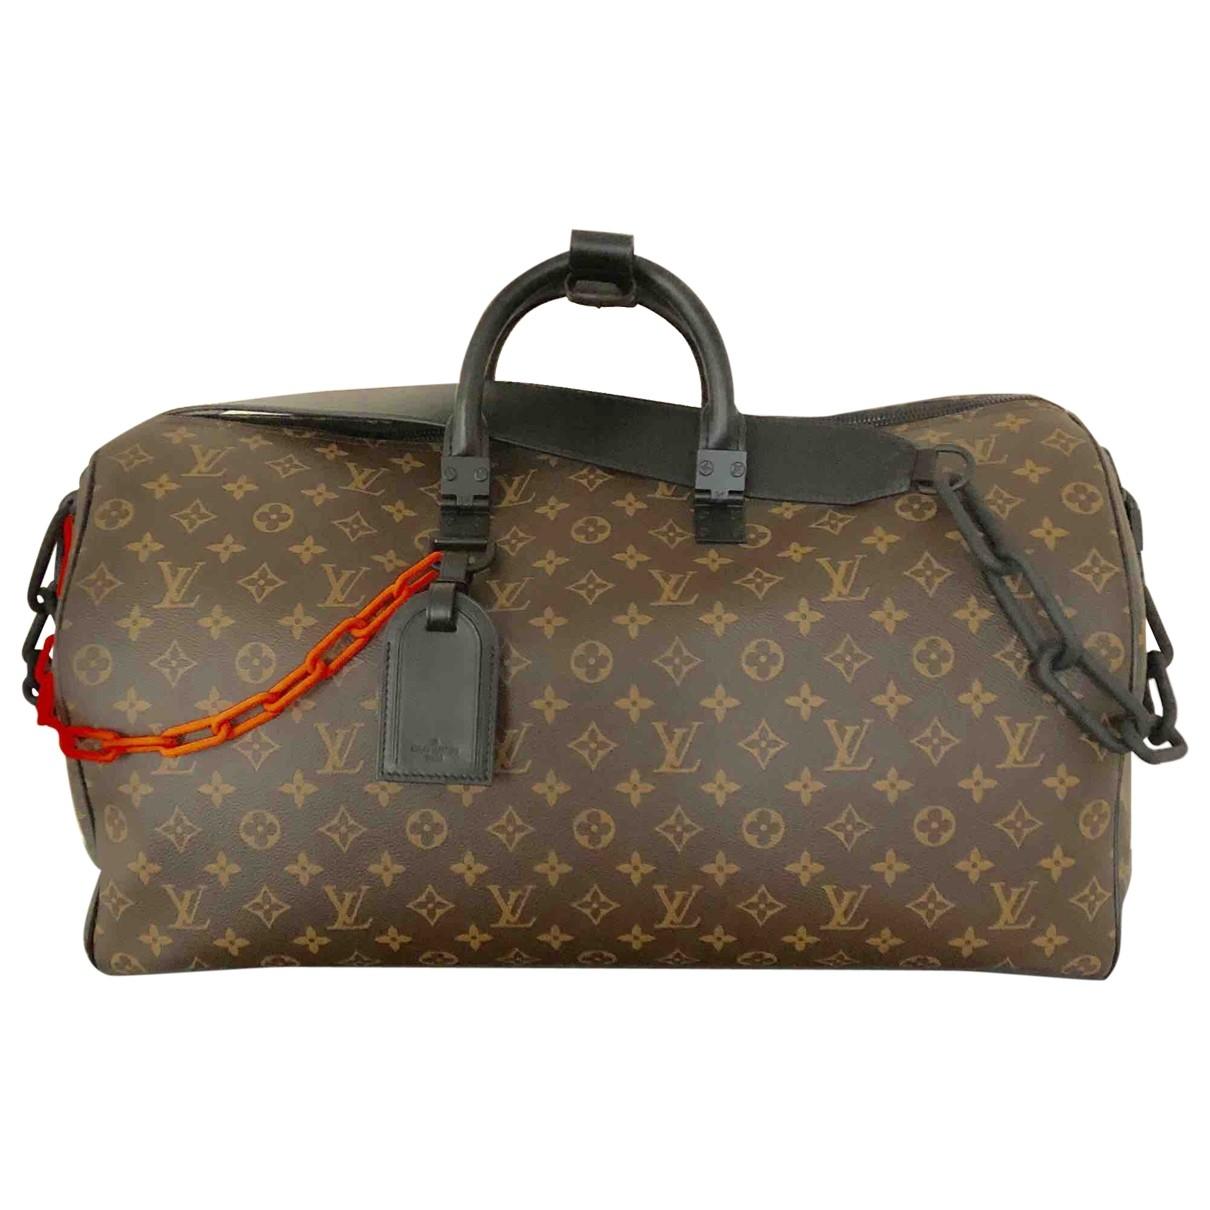 Lyst - Louis Vuitton Keepall Brown Cloth Bag in Brown for Men